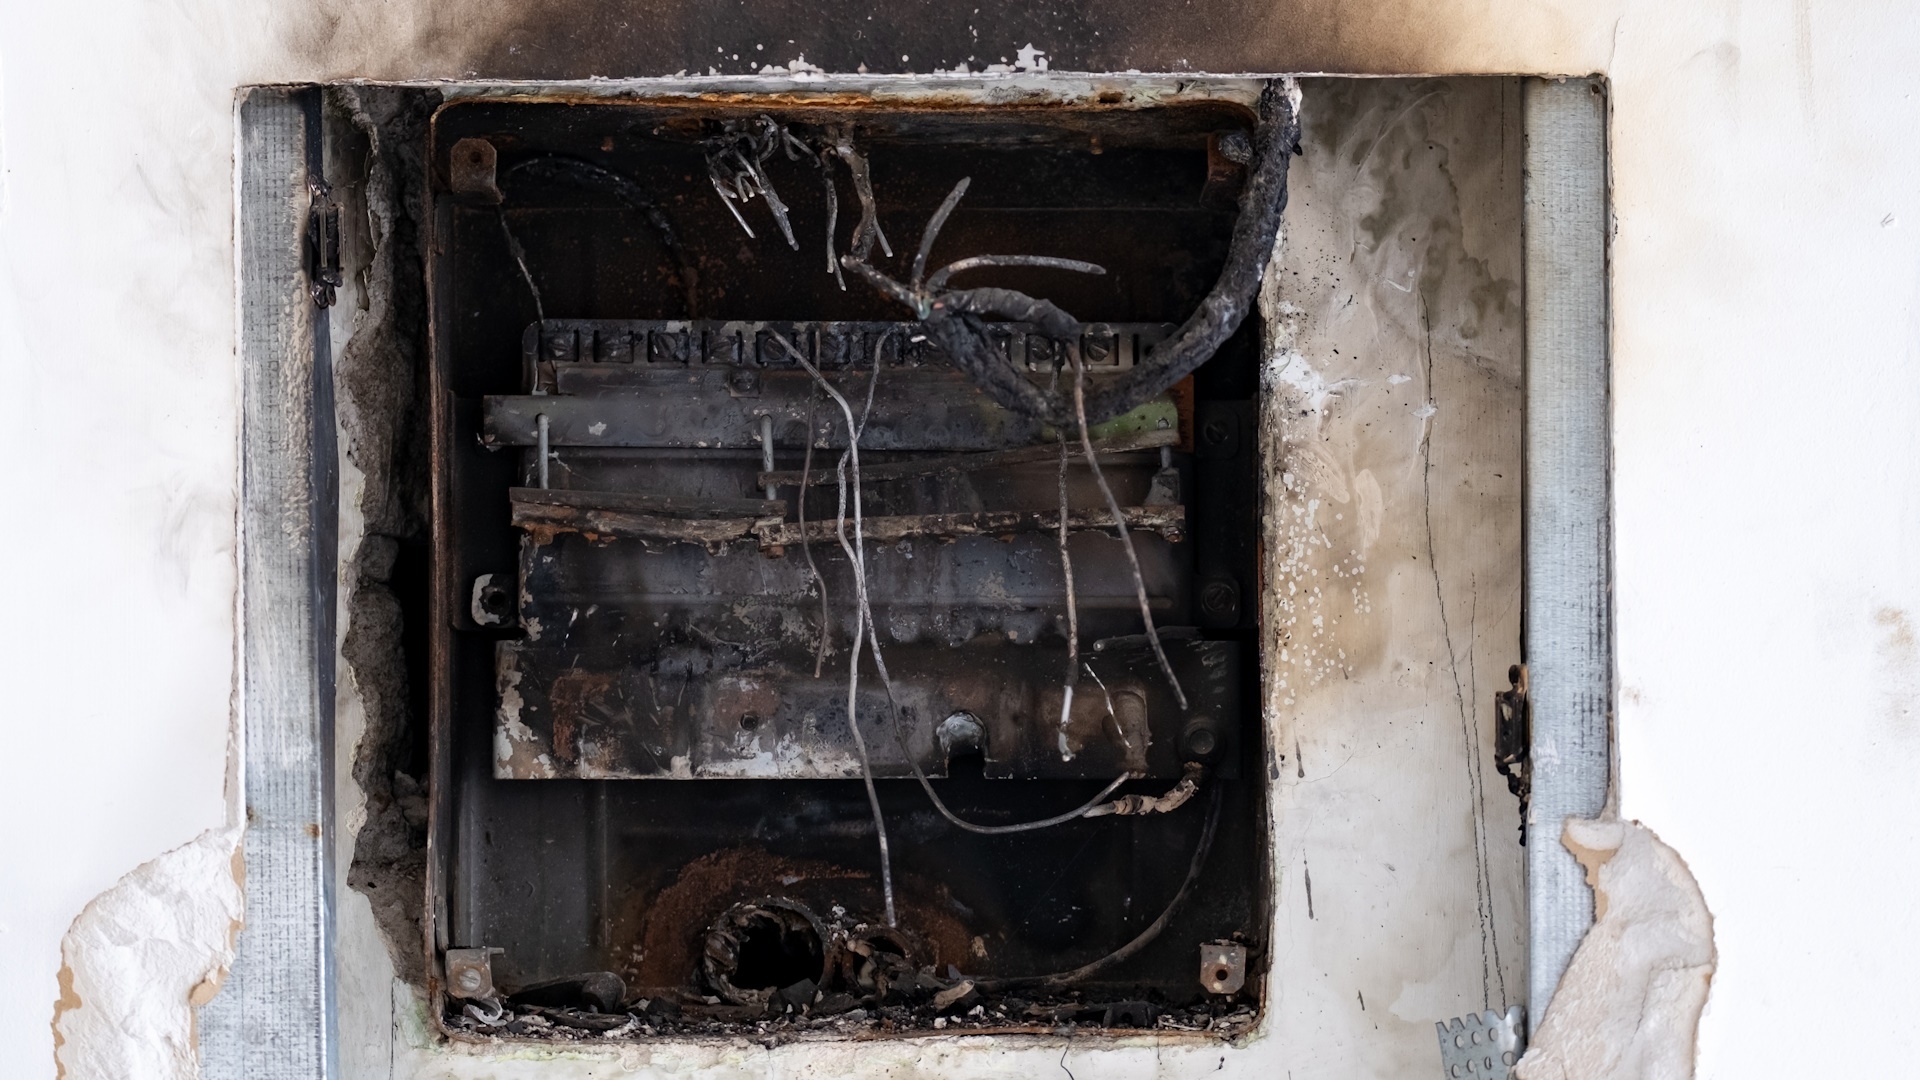 Burned Out Fusebox